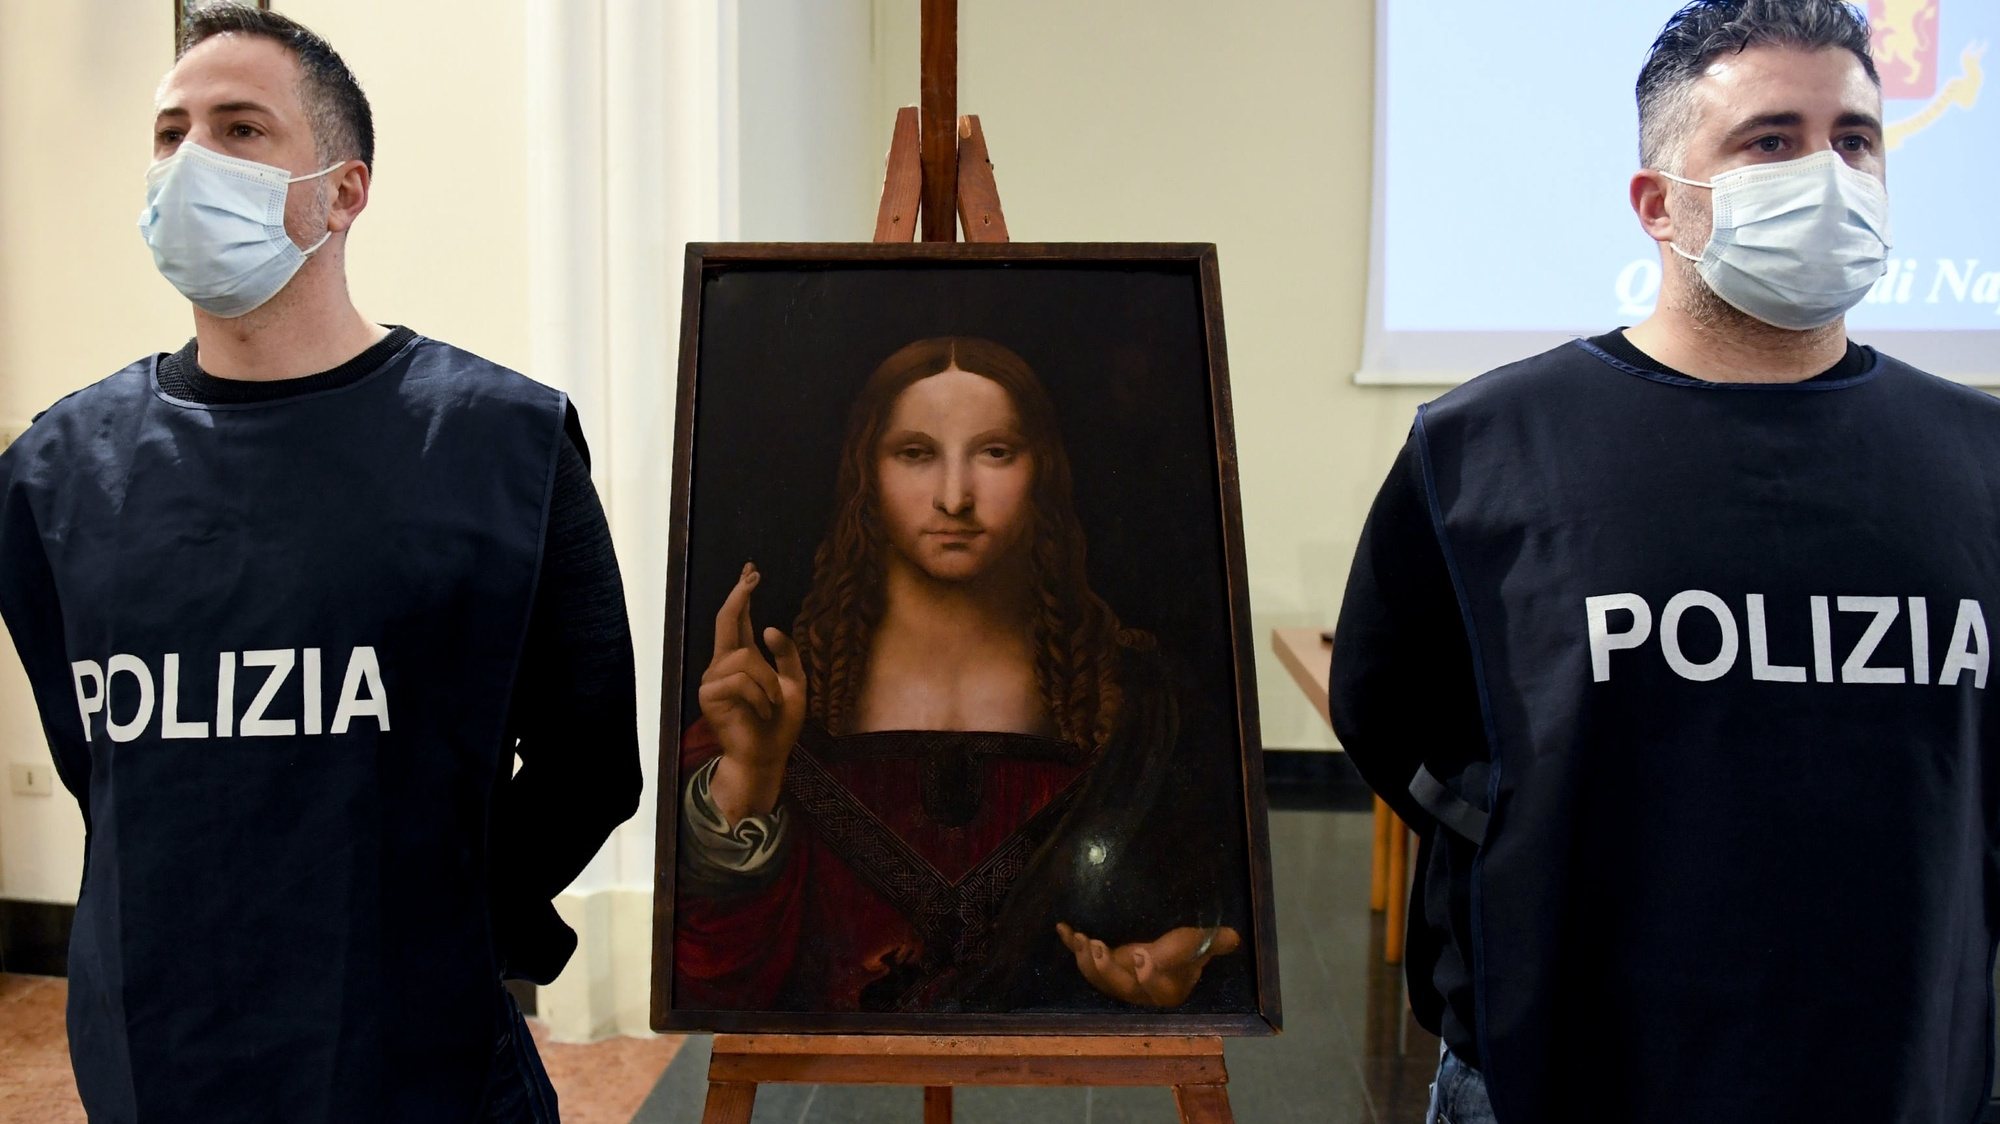 epa08948081 Two police officers stand next to the recovered painting &#039;Salvator Mundi&#039;, in Naples, southern Italy, 18 January 2021 (issued 19 January 2021). The 15th-century painting of Christ the Saviour from the school of Leonardo da Vinci, part of the &#039;DOMA&#039; collection, has been recovered by police during a search in Naples after it was stolen from the Basilica di San Domenico Maggiore in the southern Italian city two years ago. A 36-year-old, the owner of the flat, has been detain on suspicion of receiving stolen goods, media reported.  EPA/CIRO FUSCO